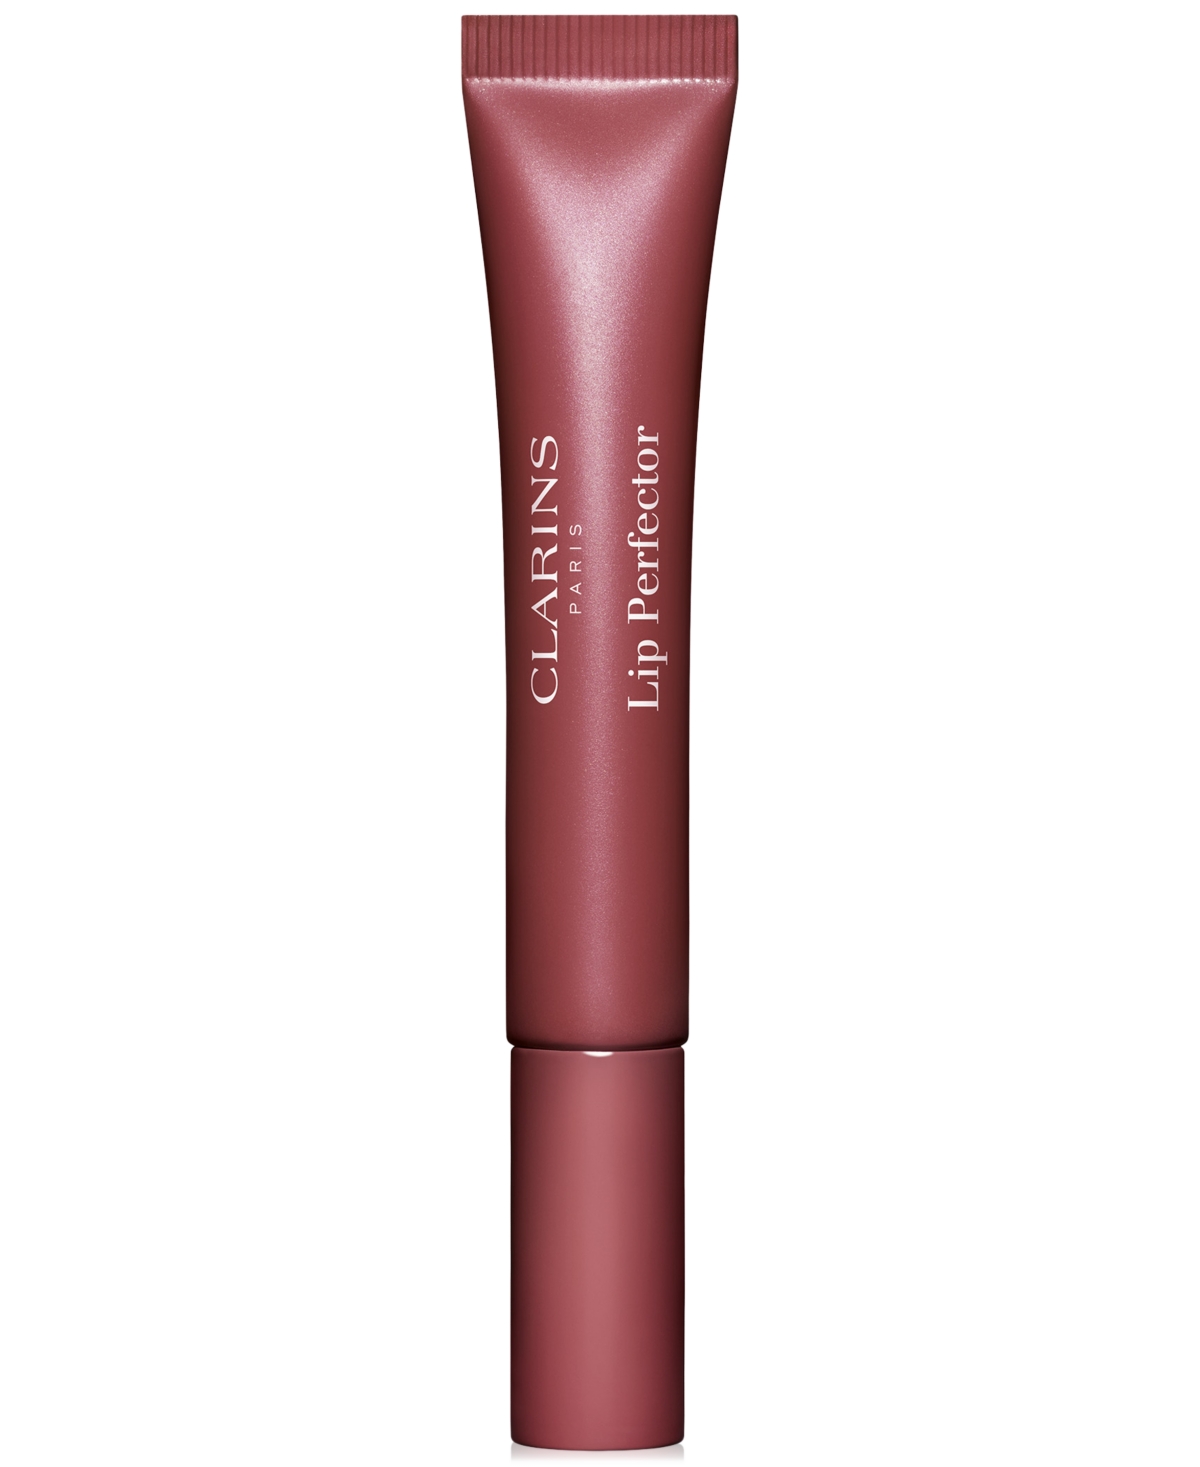 Clarins Lip Perfector 2-in-1 Lip & Cheek Color Balm 0.35 Oz. In Mulberry Glow